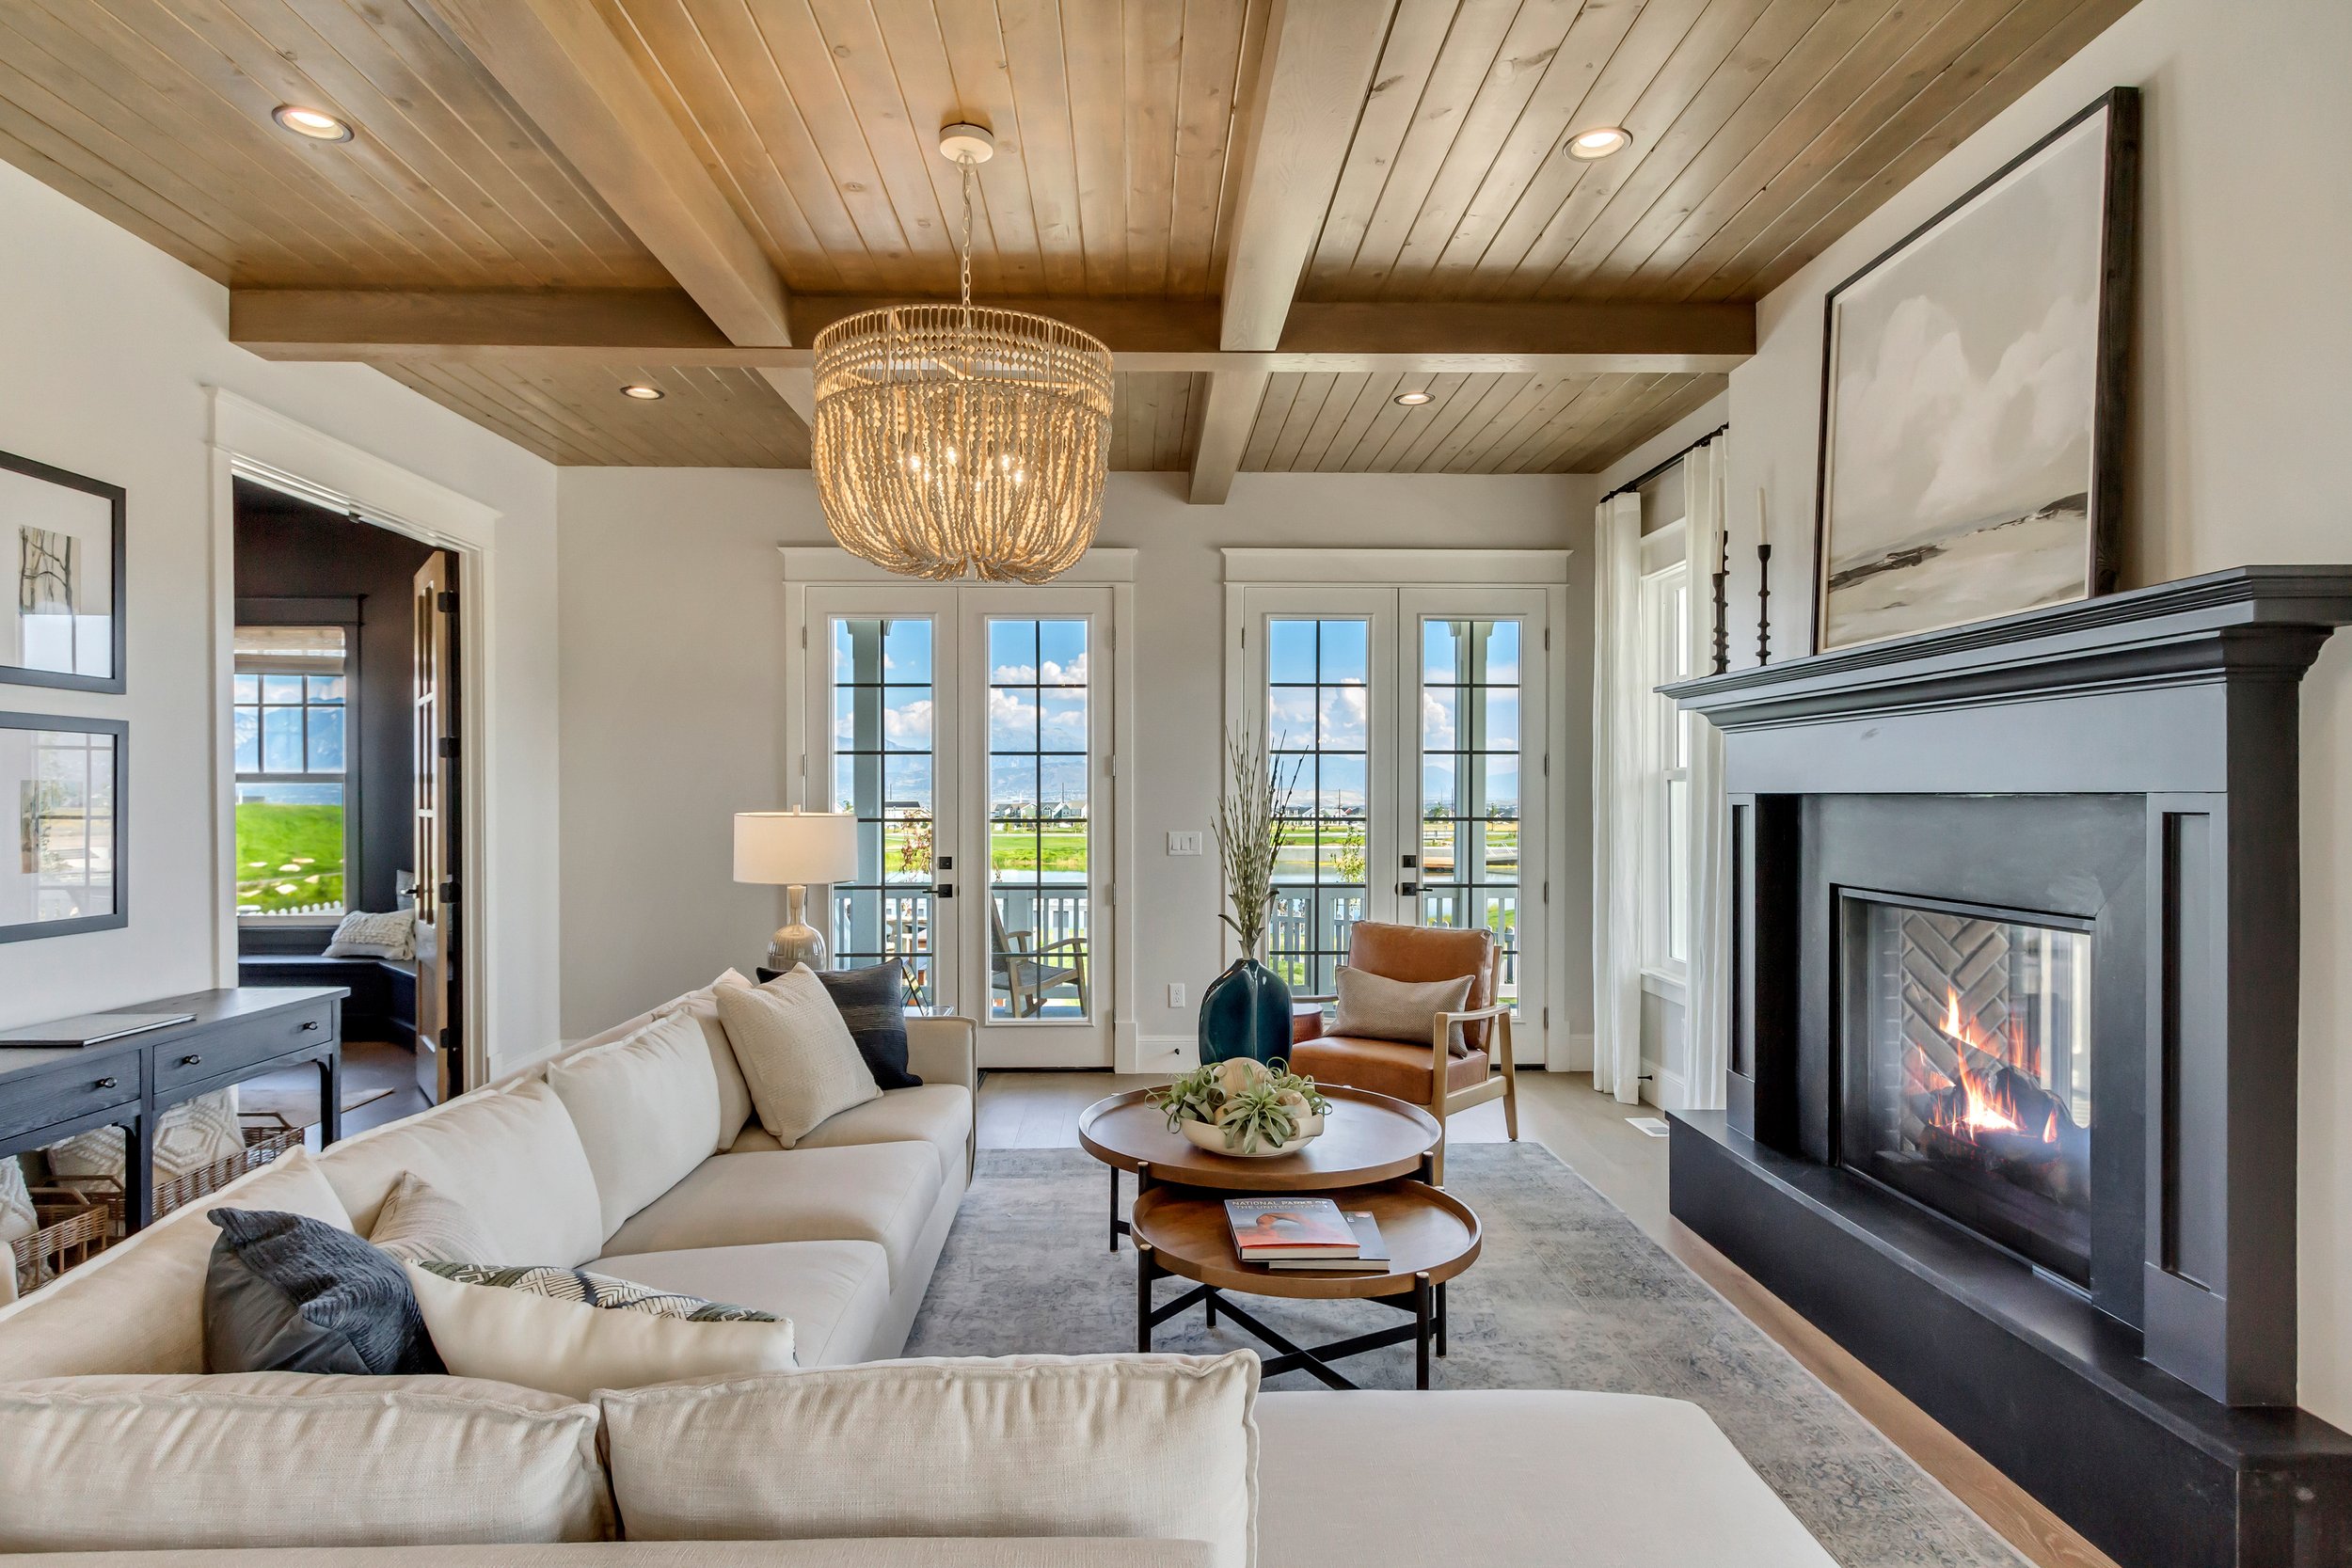  Living room with exposed beams 